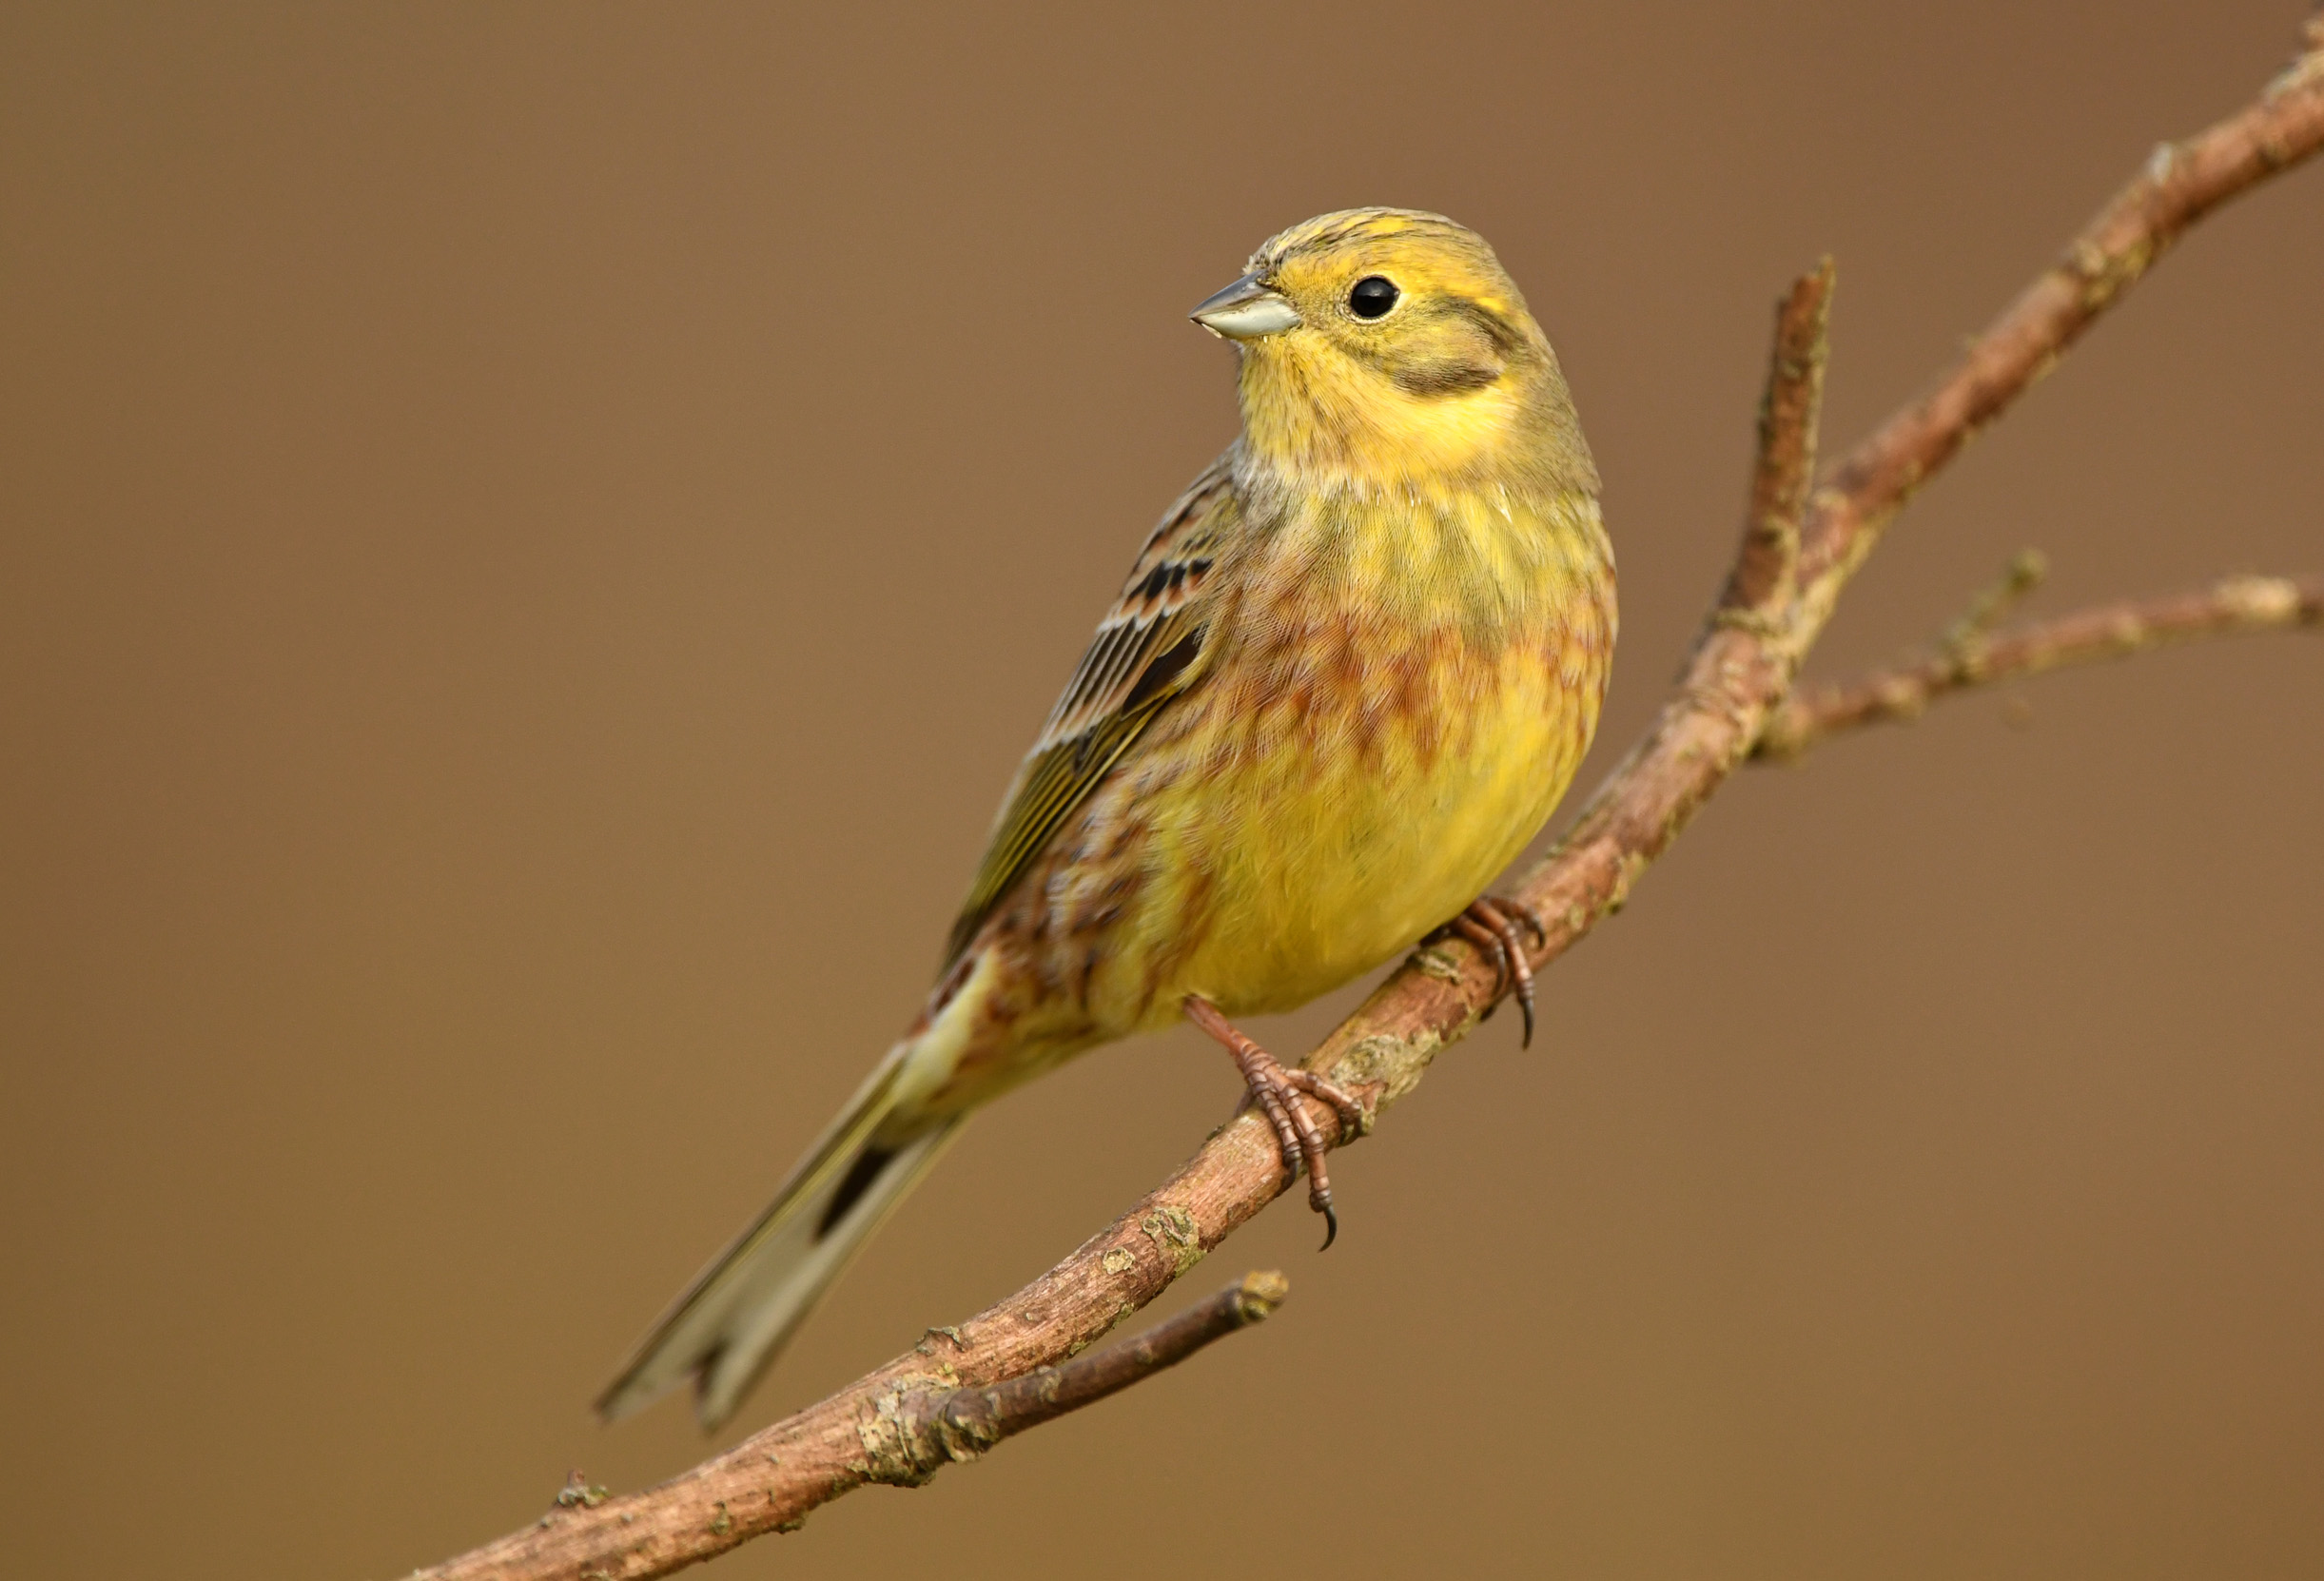 Yellowhammer perched on a tree branch.